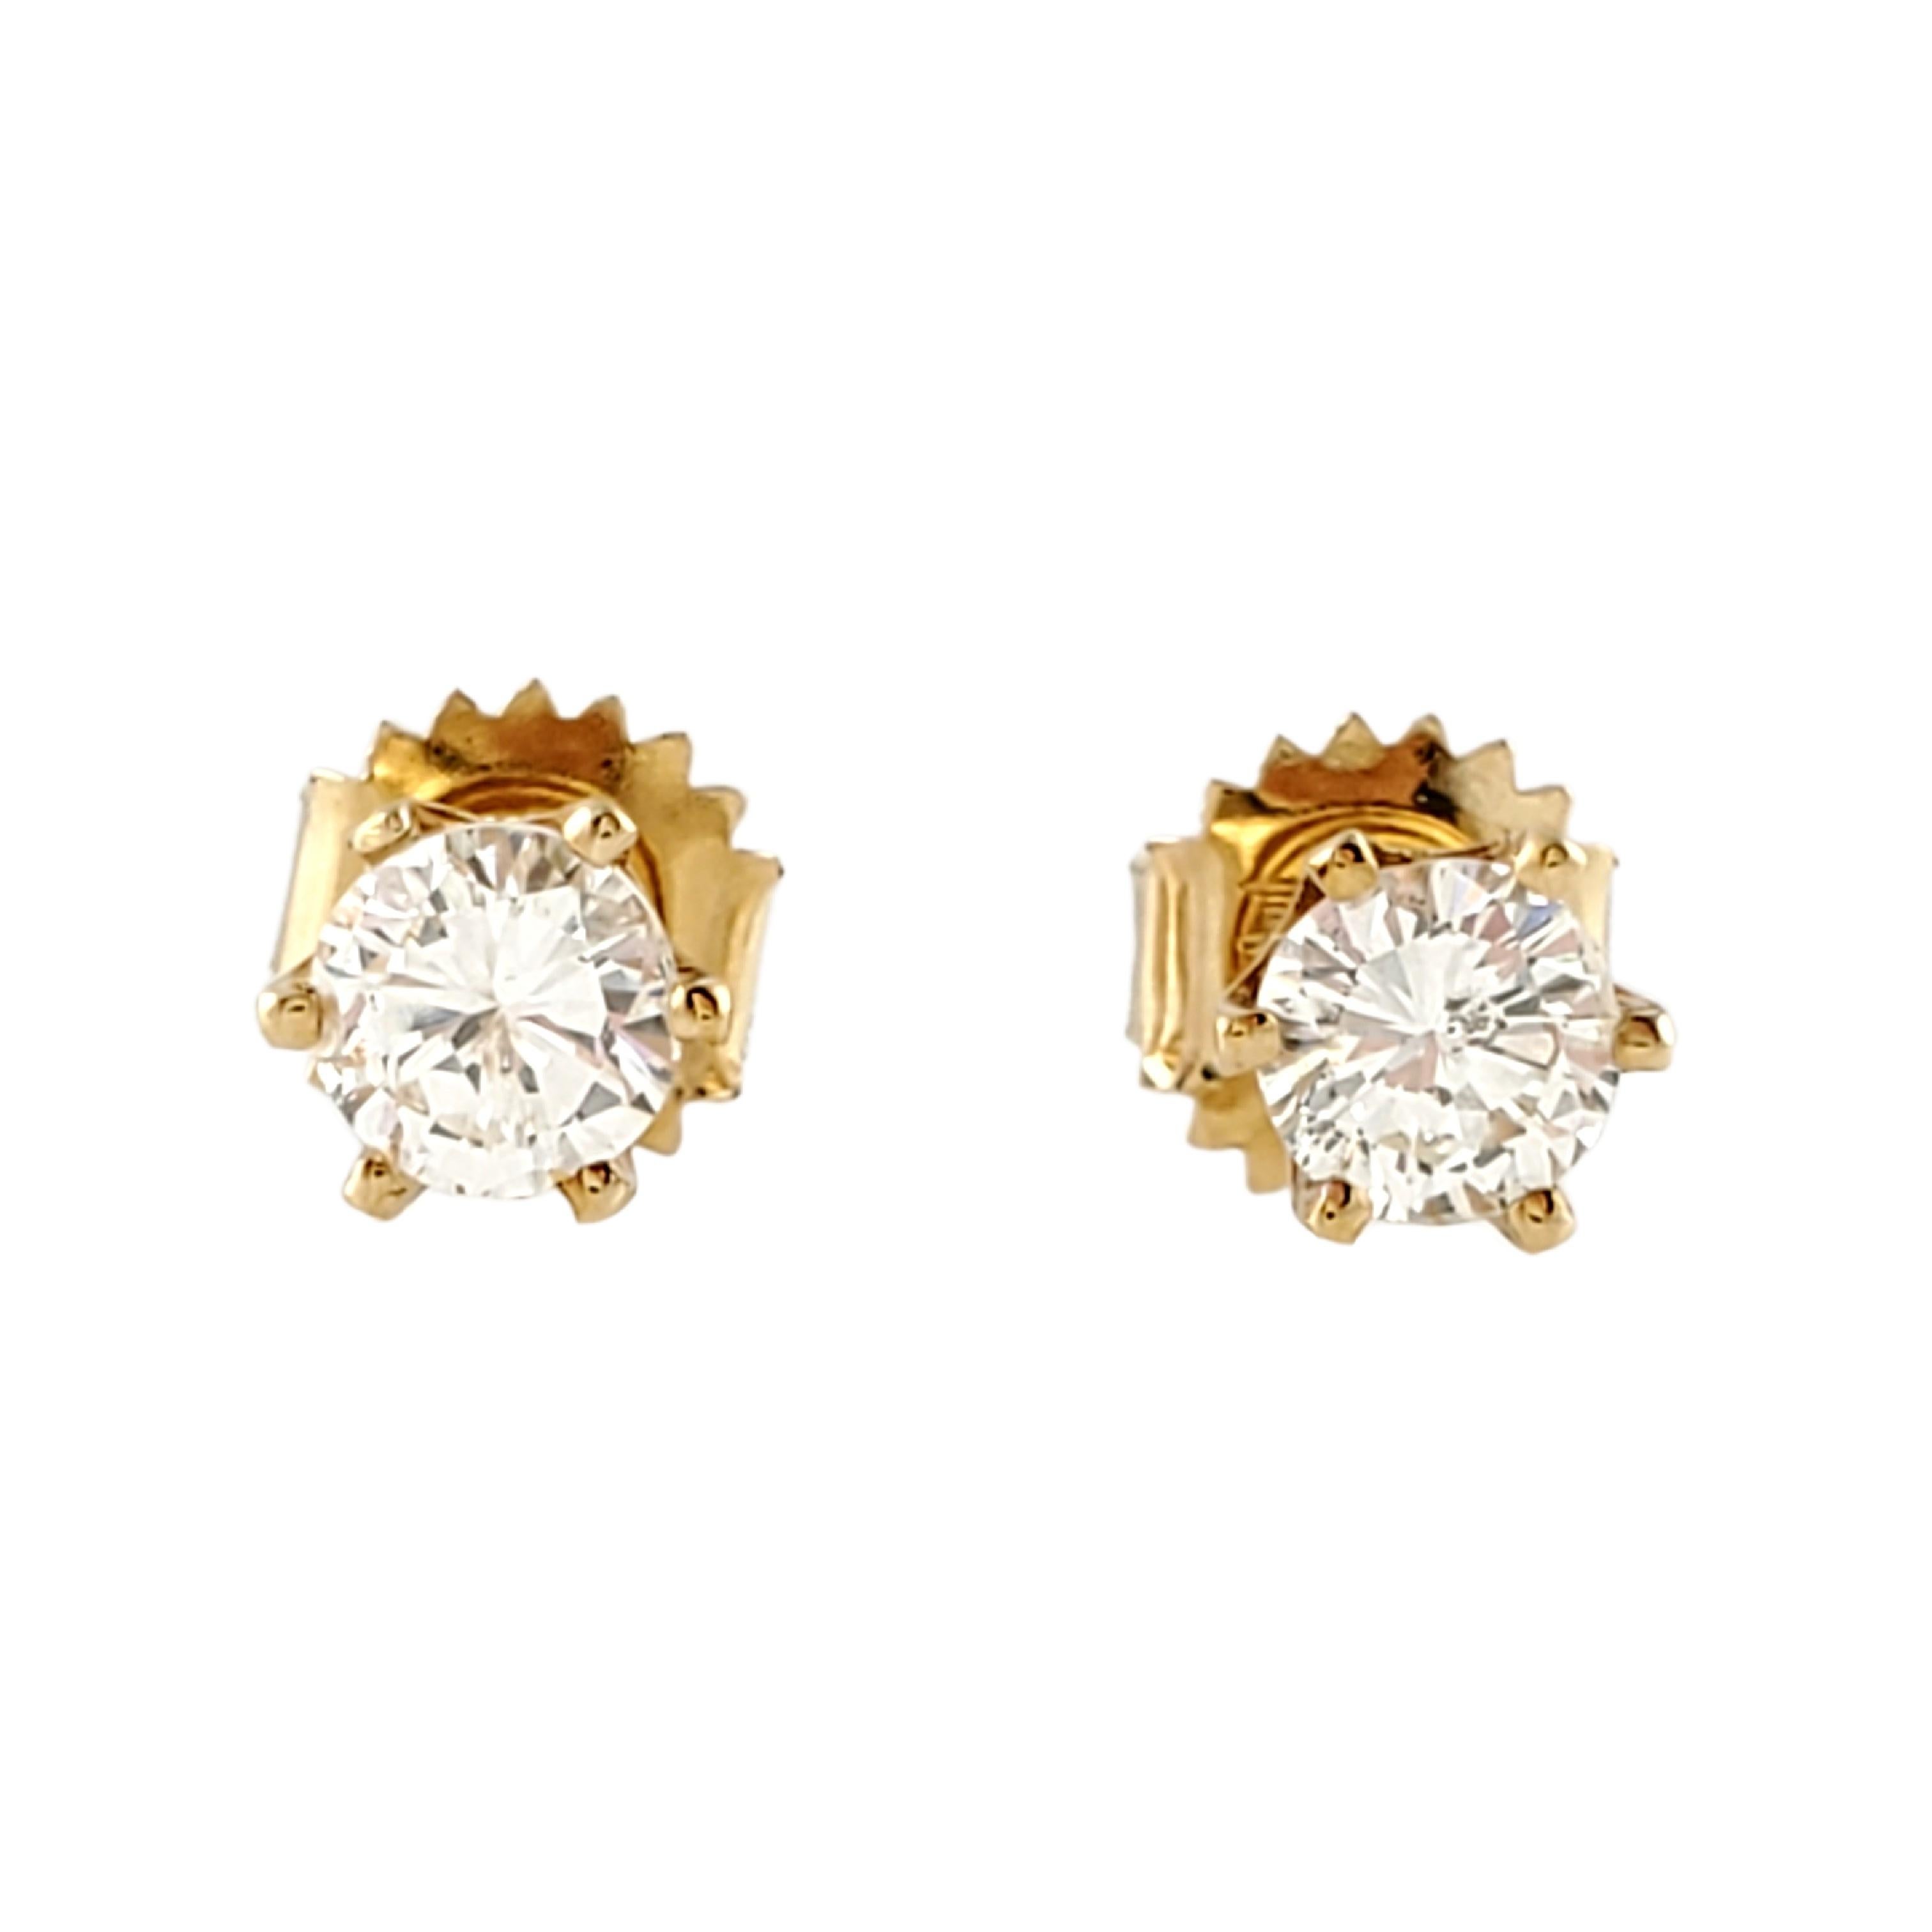 Vintage 14 Karat Yellow Gold Diamond Stud Earrings .80 ct. 
These classic sparkling stud earrings each feature one round brilliant cut diamond (.40 ct.) set in a yellow gold six-prong setting. Screw back closures. 
Approximate total diamond weight: